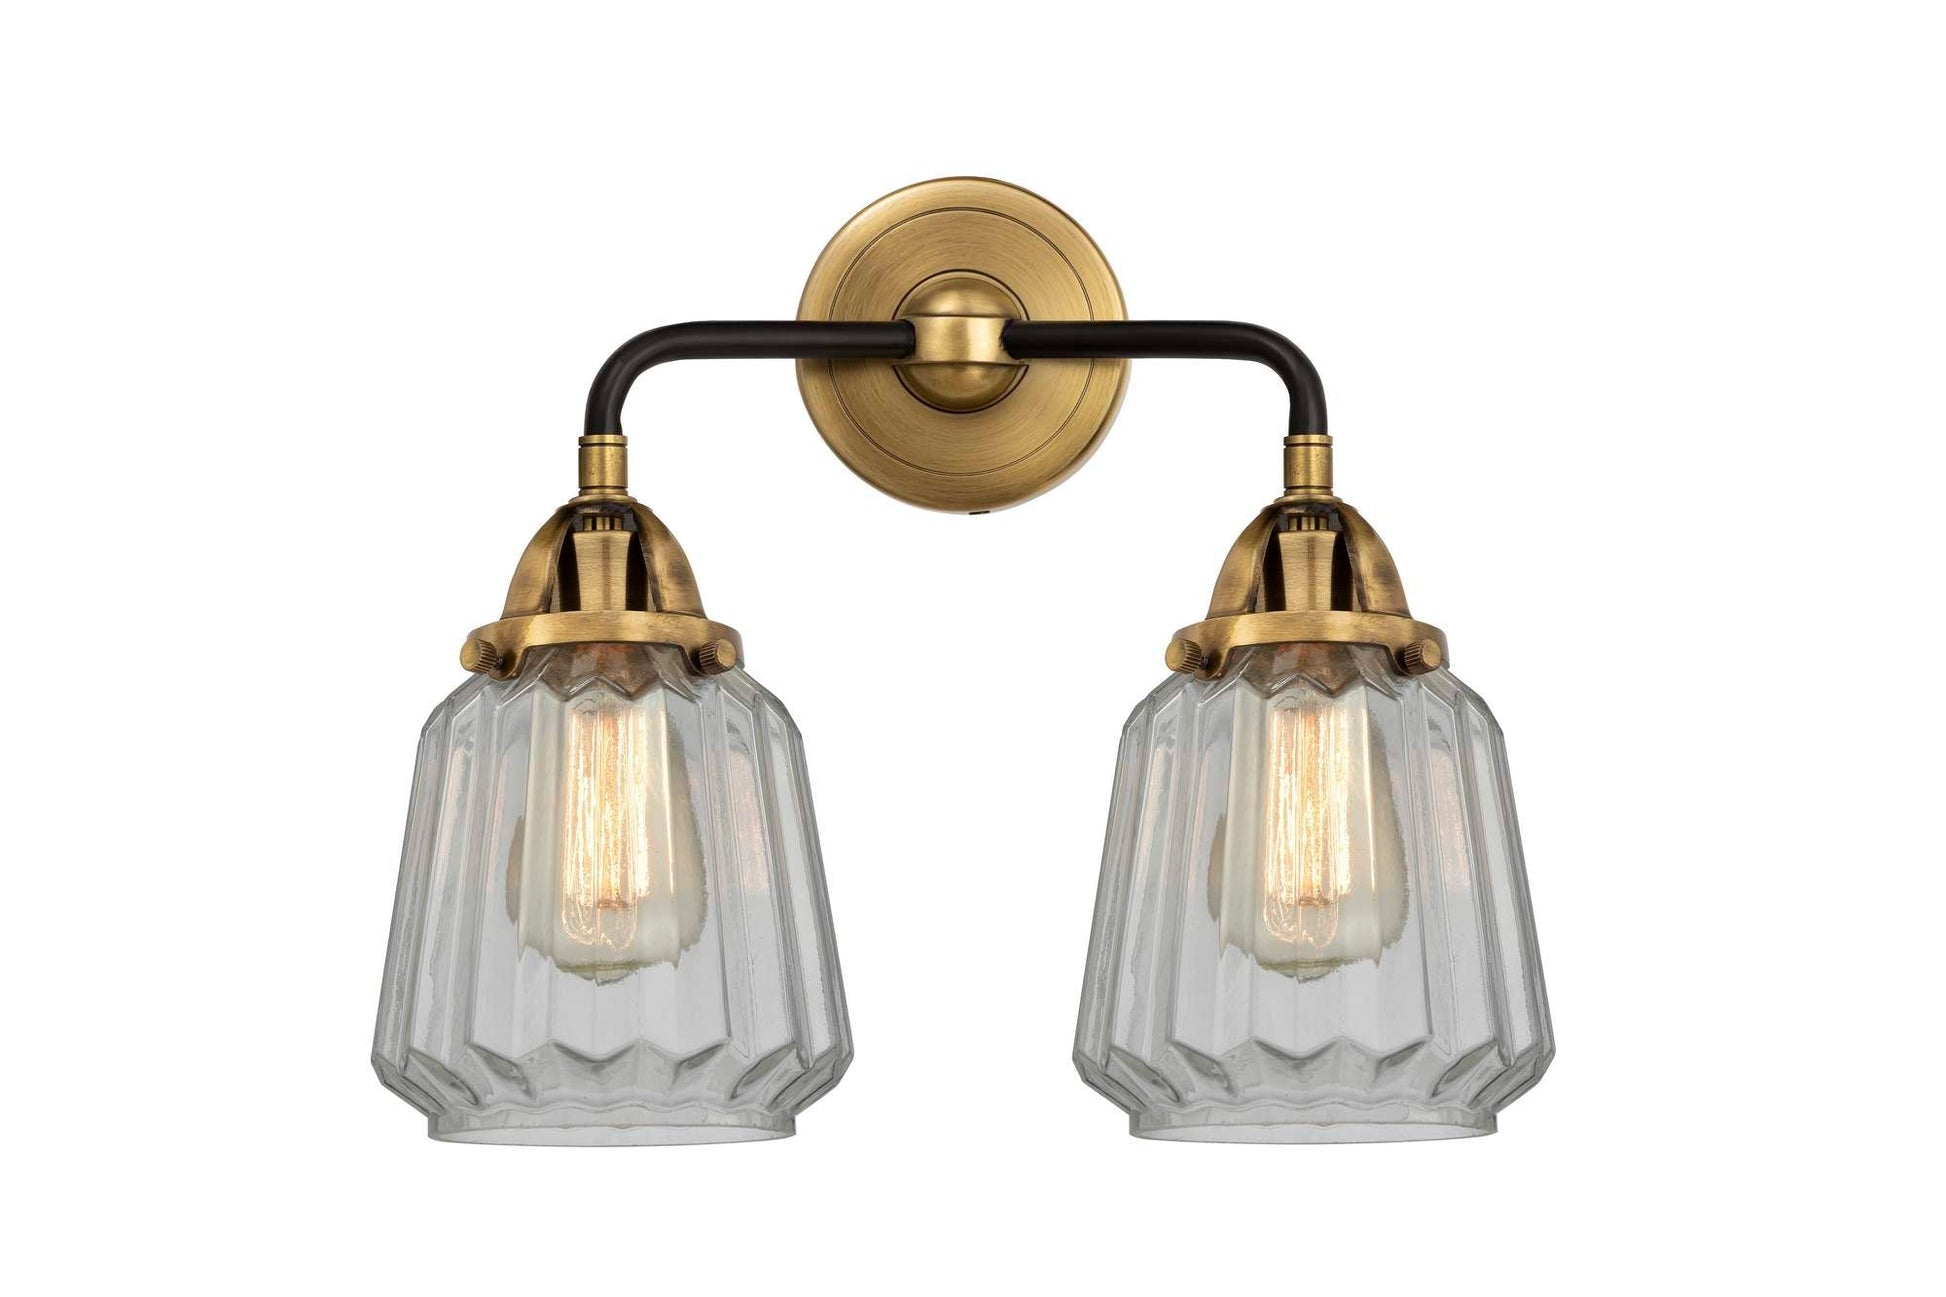 288-2W-BAB-G142 2-Light 14" Black Antique Brass Bath Vanity Light - Clear Chatham Glass - LED Bulb - Dimmensions: 14 x 7.25 x 12.125 - Glass Up or Down: Yes